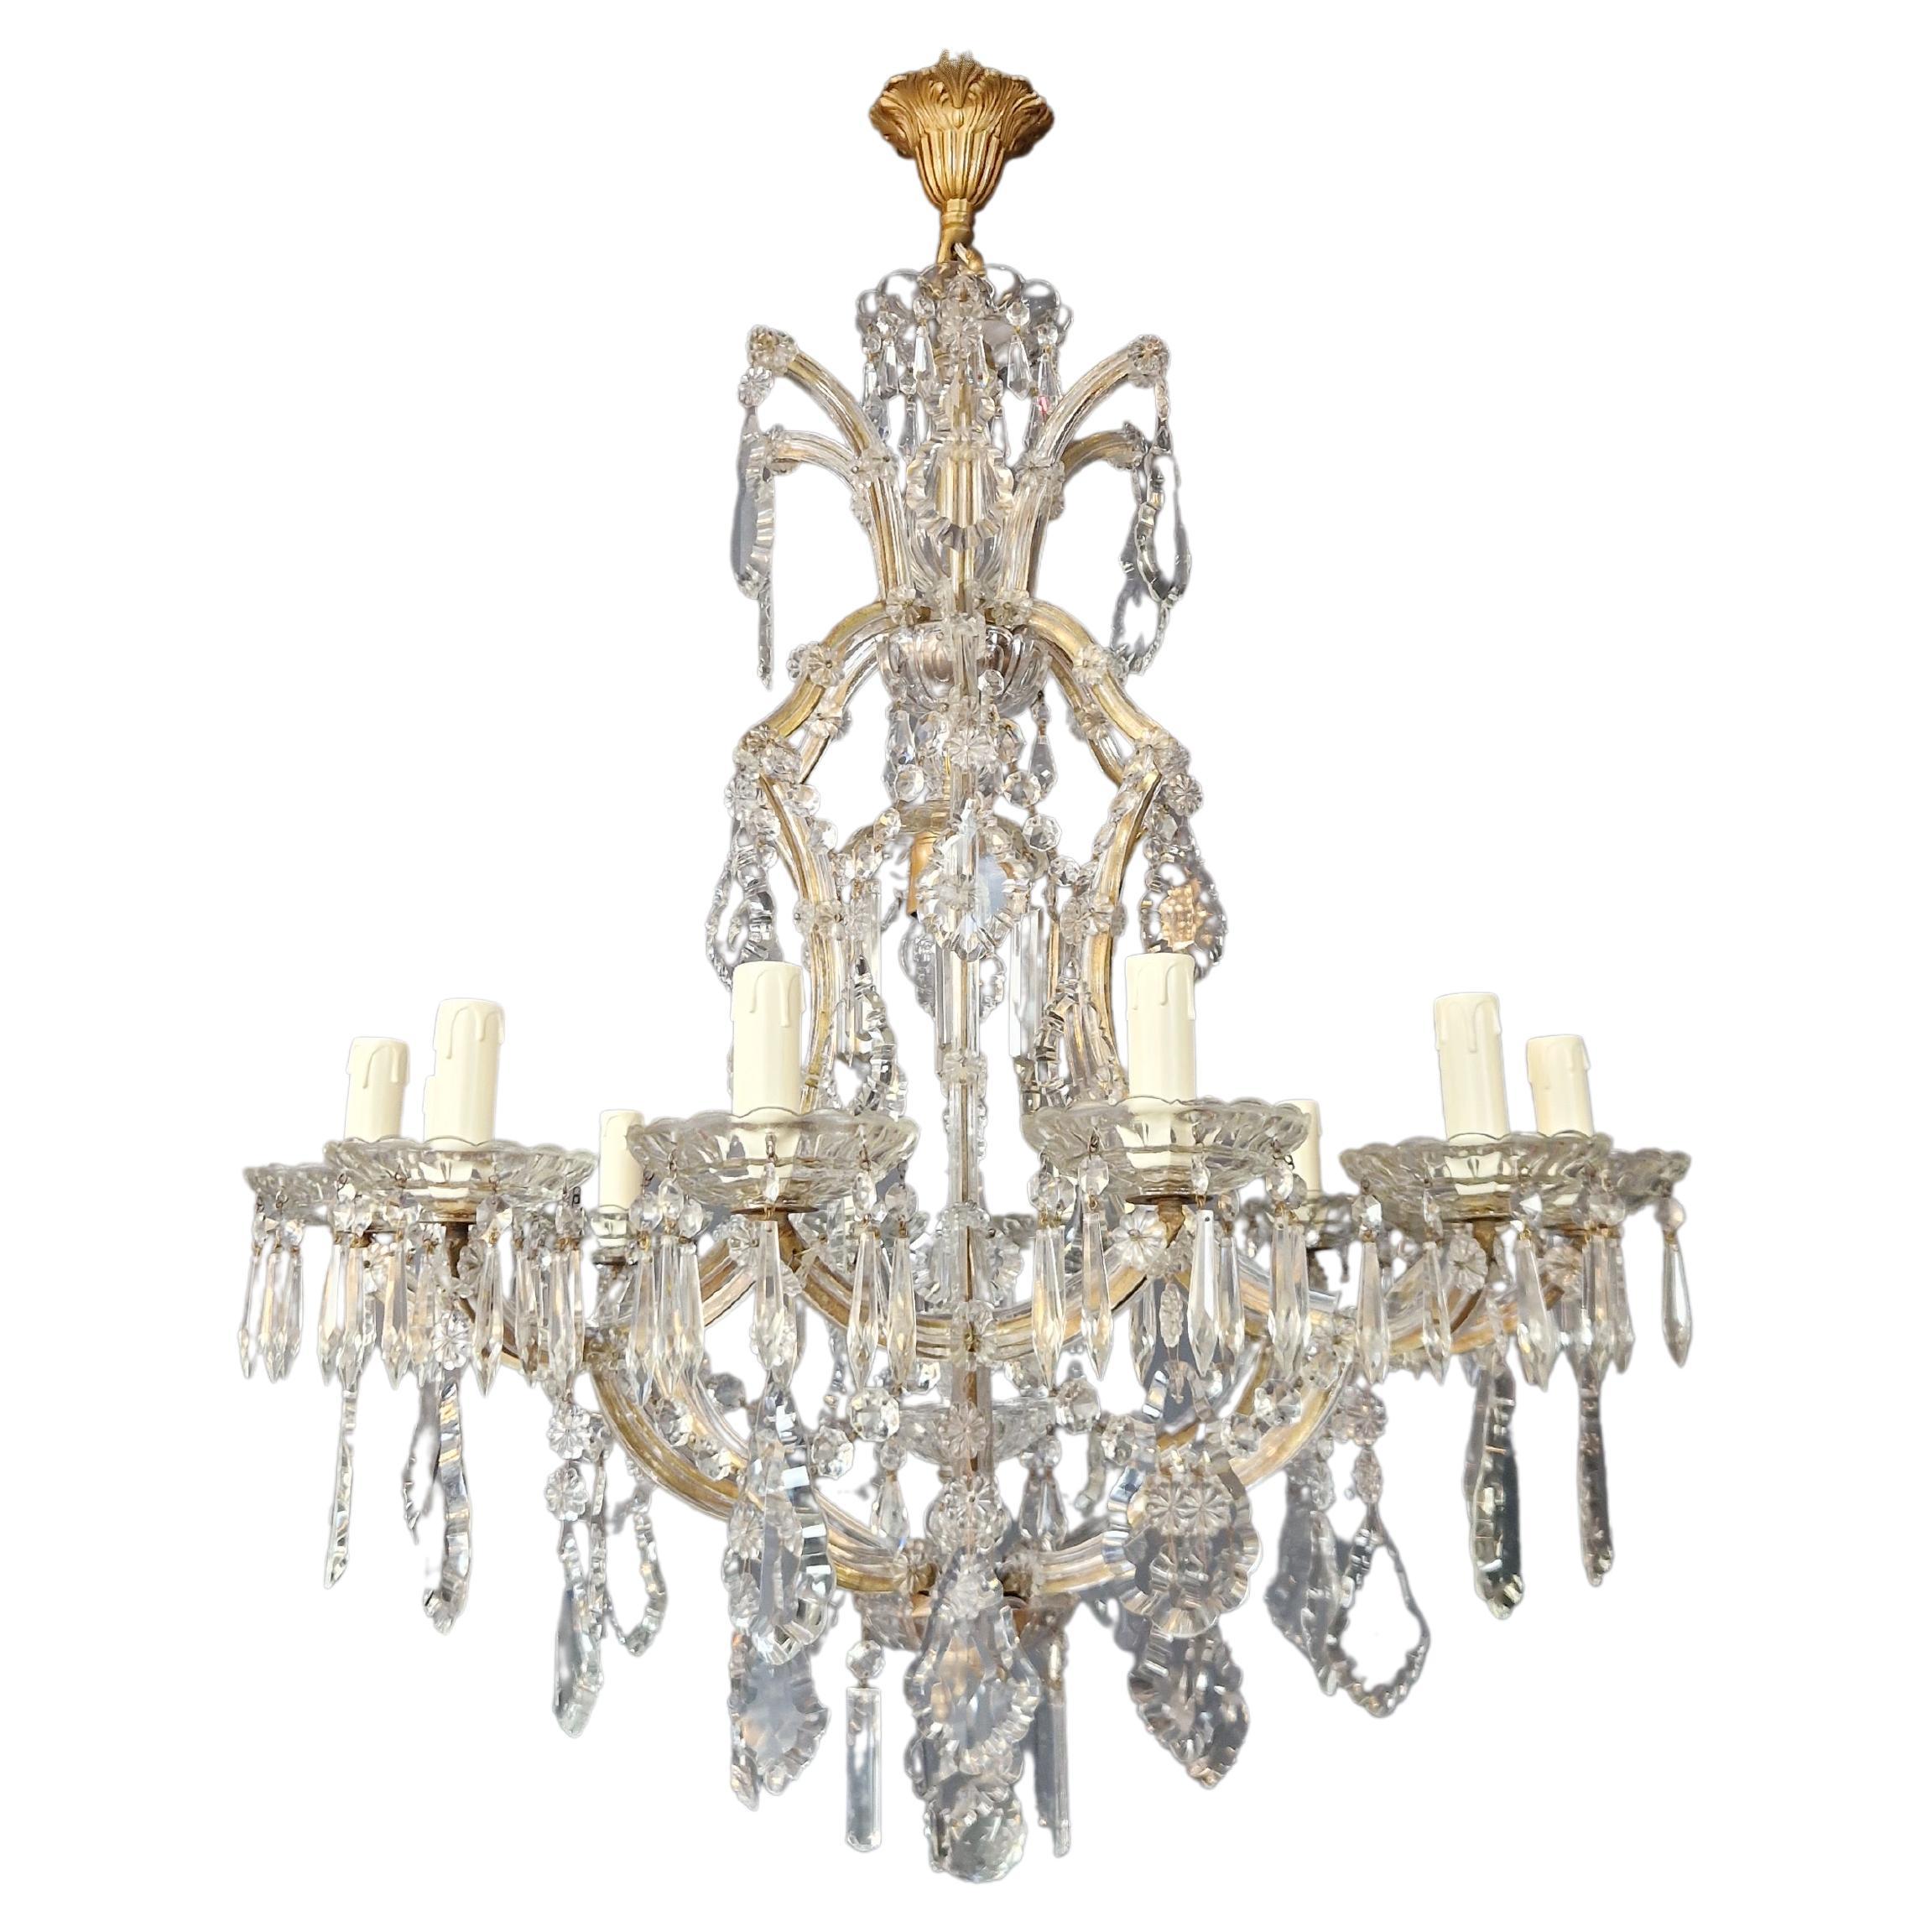 Maria Theresa Crystal Chandelier Antique Classic Clear Glass